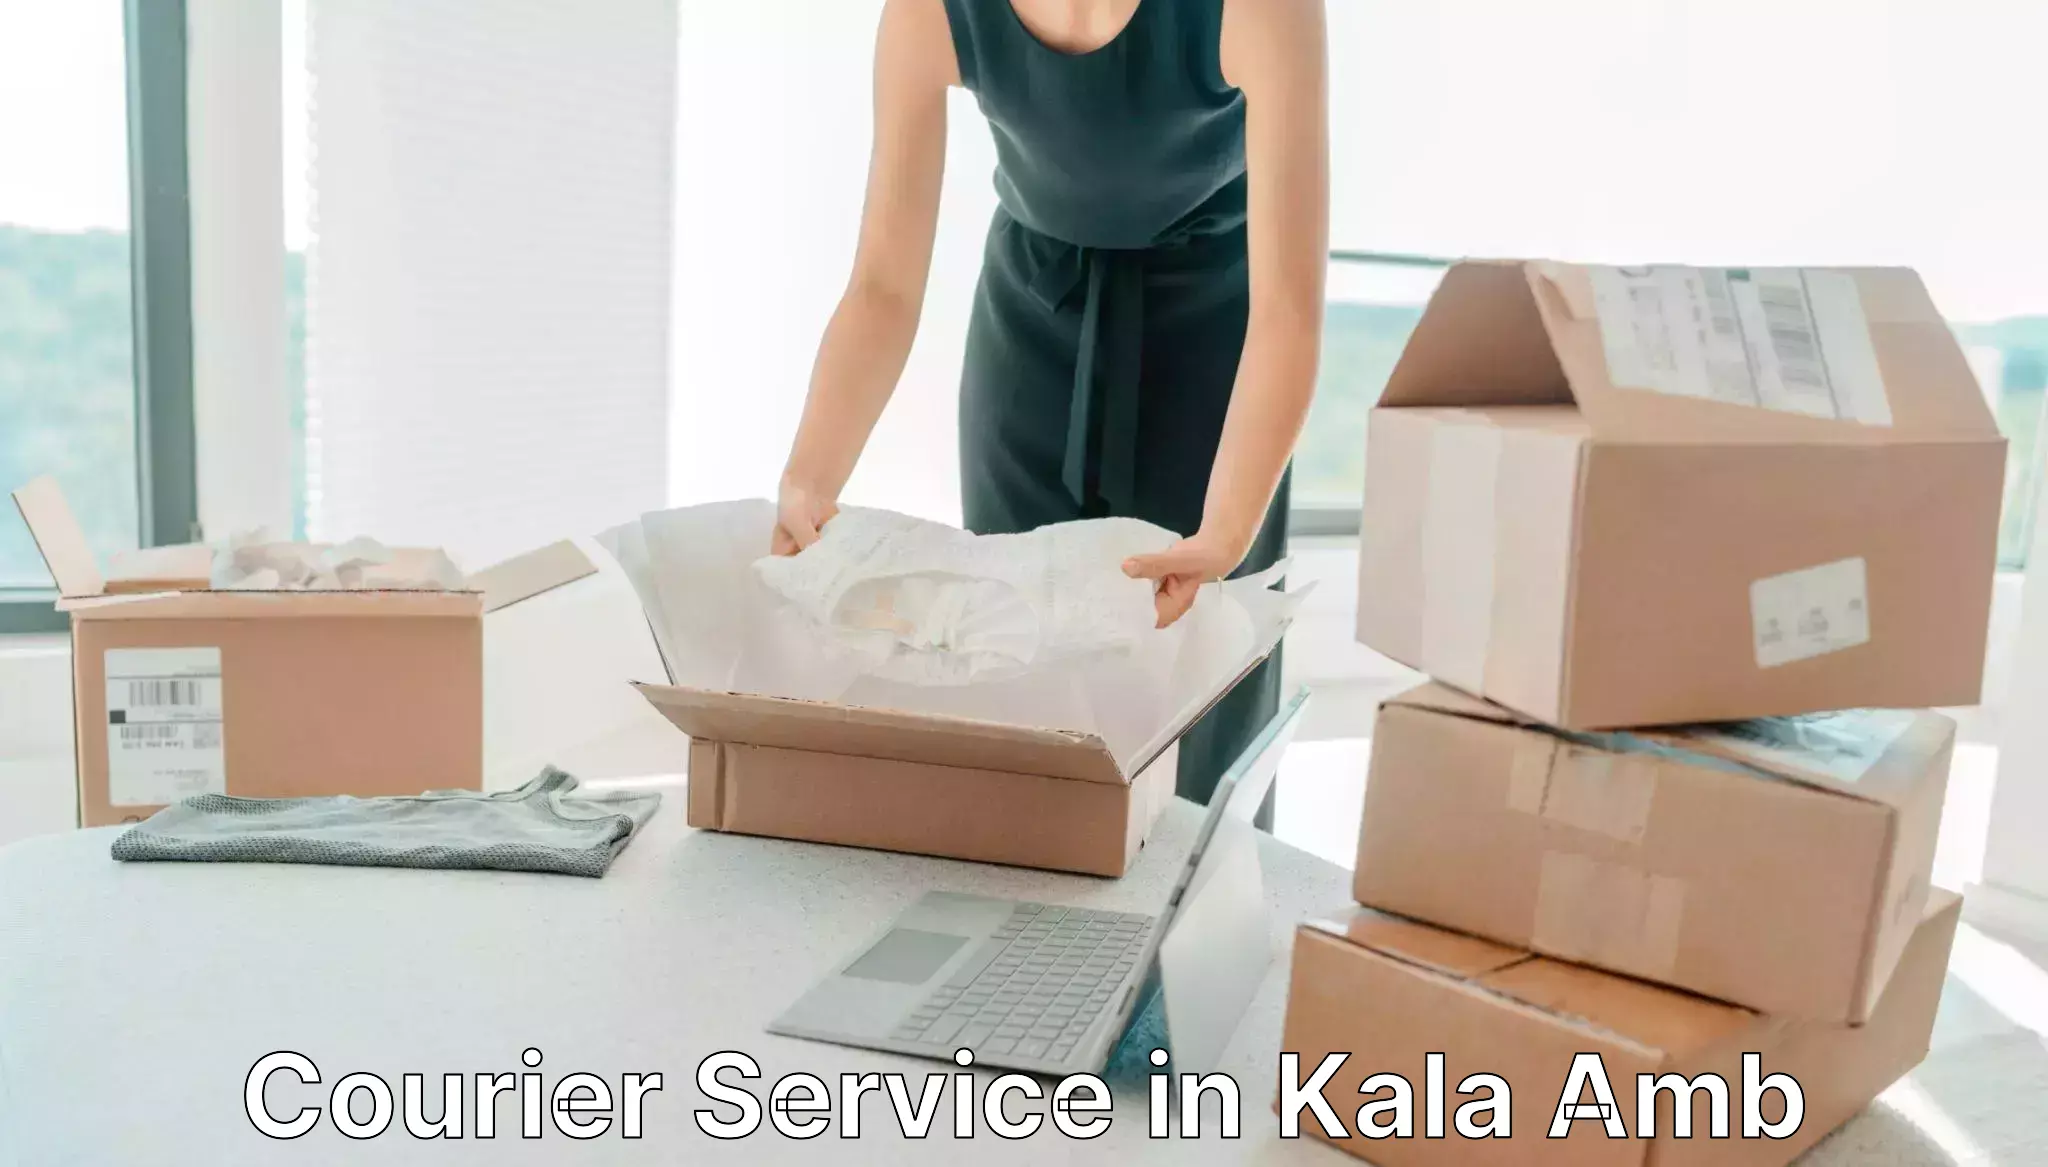 Postal and courier services in Kala Amb